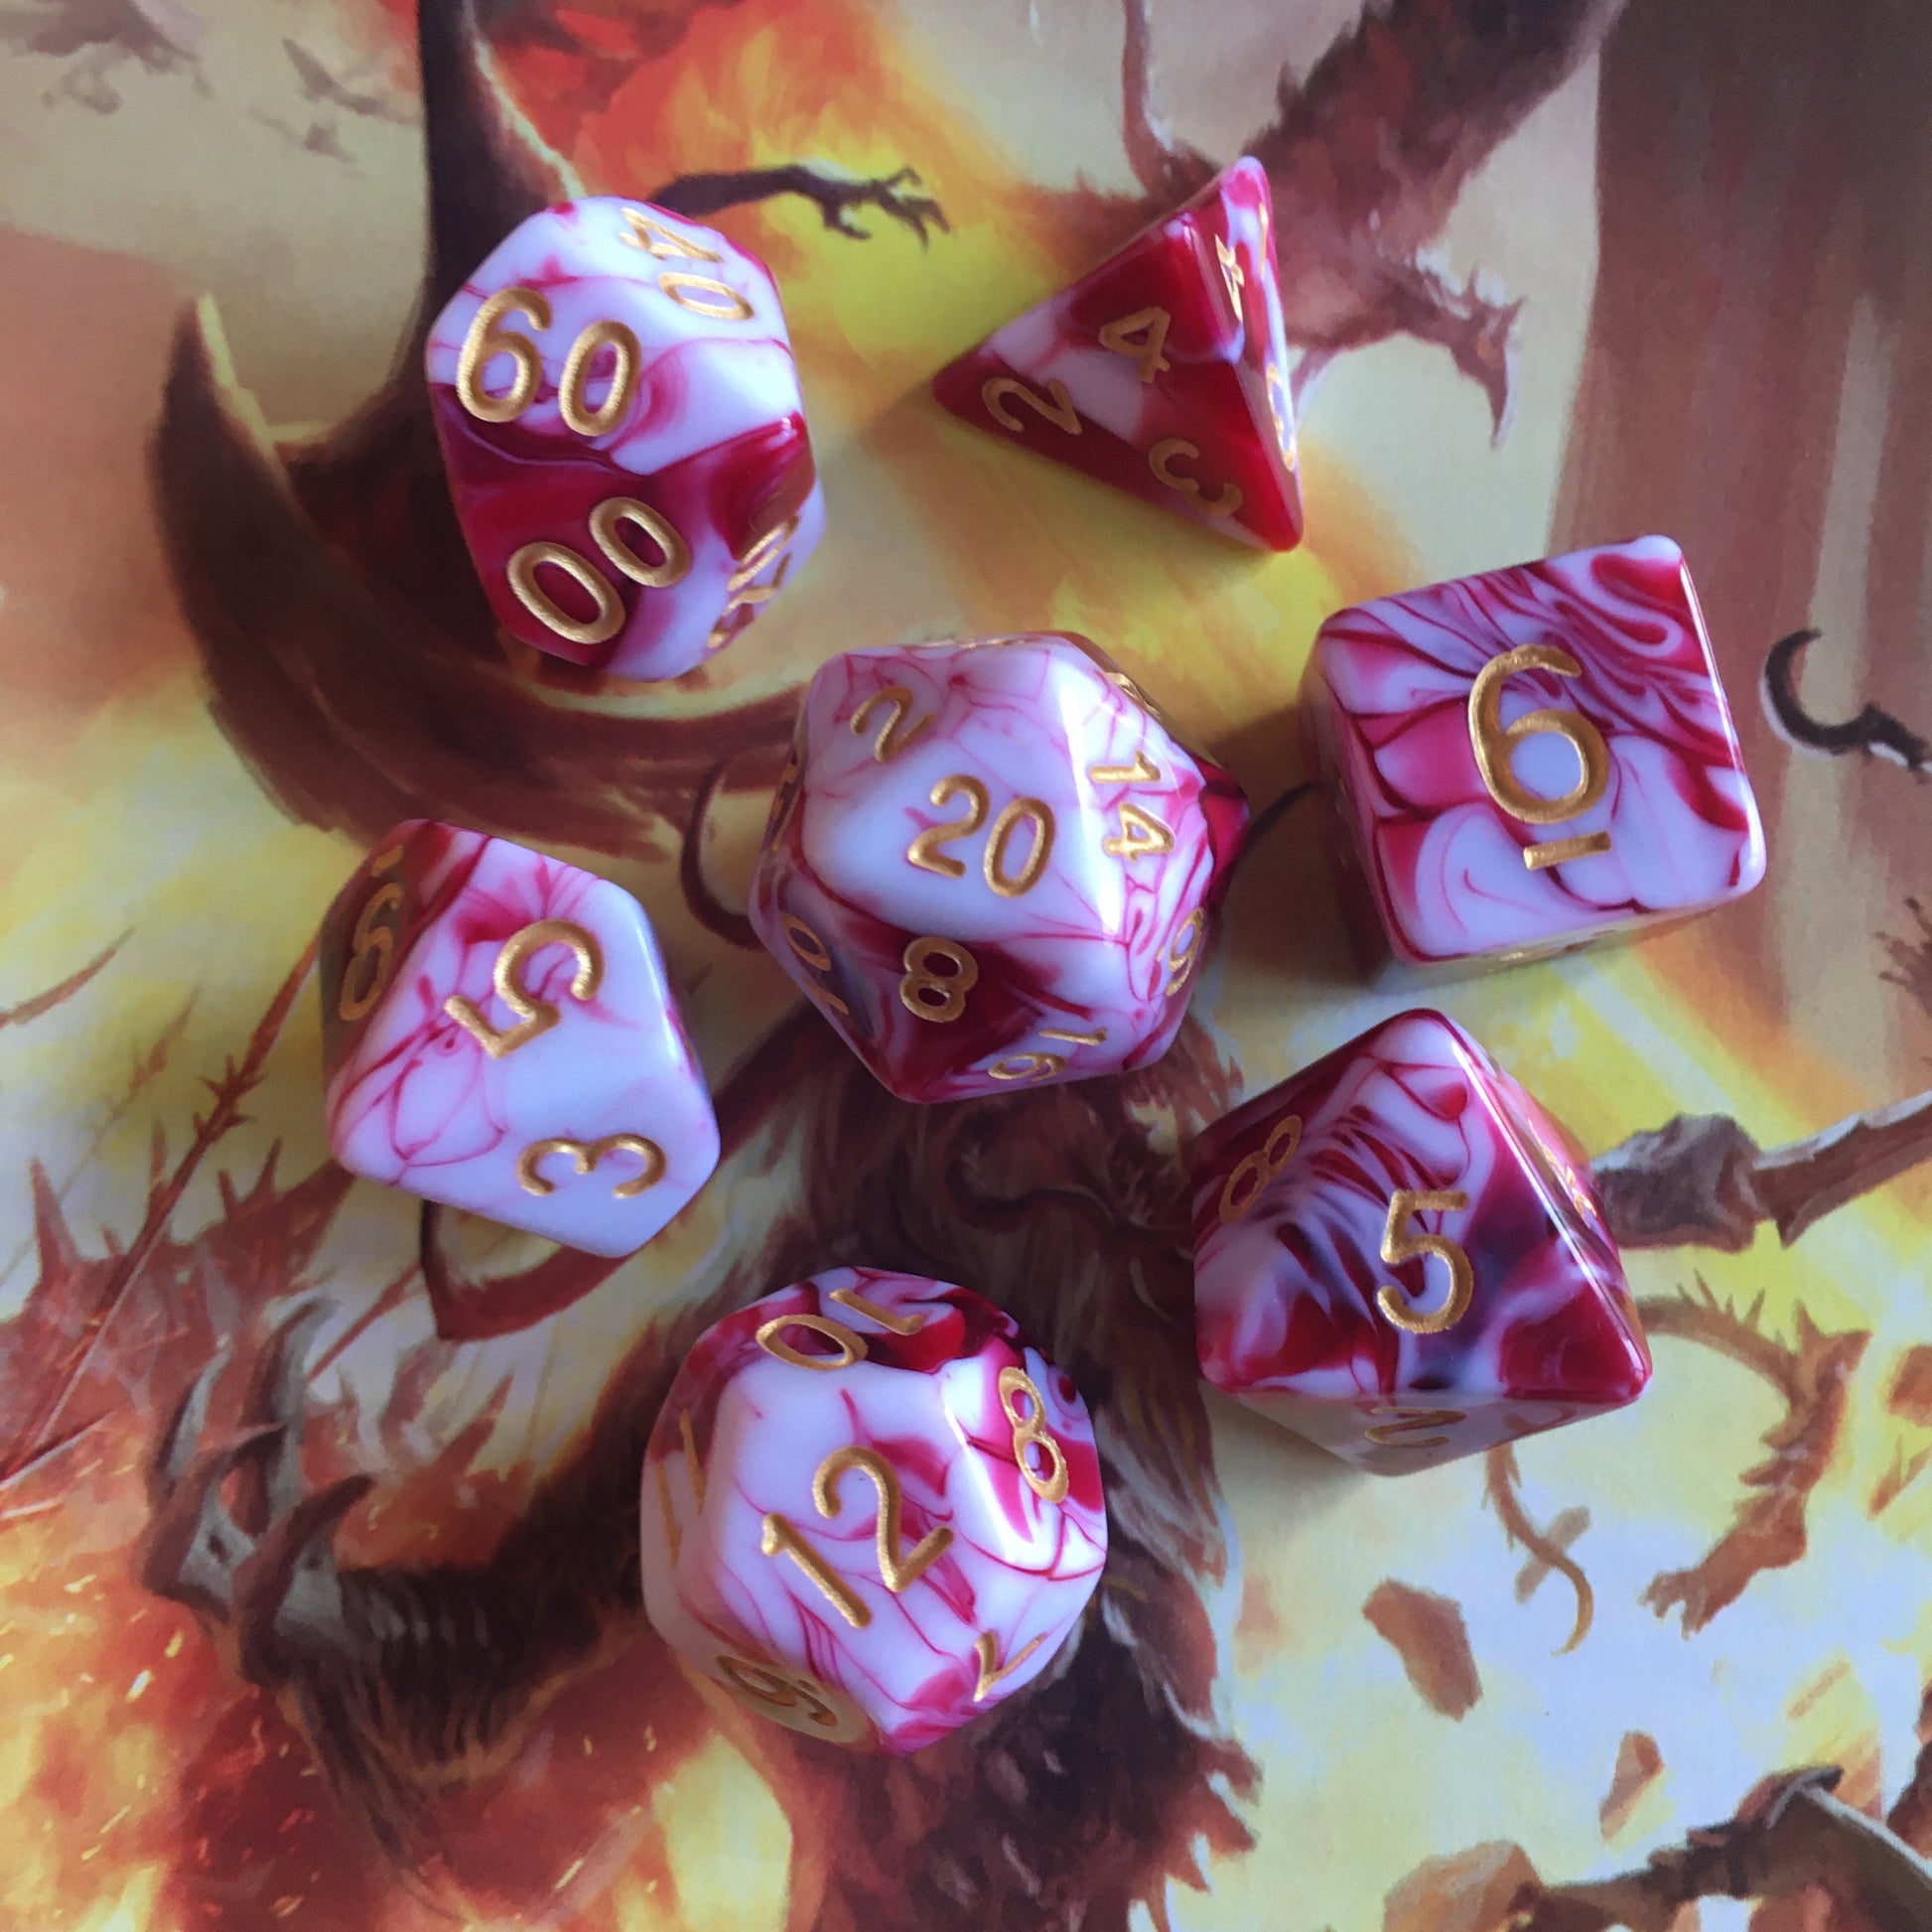 Swirls dnd TTRPG dice set for RPG role playing games and dice goblin collectors from a UK dice store